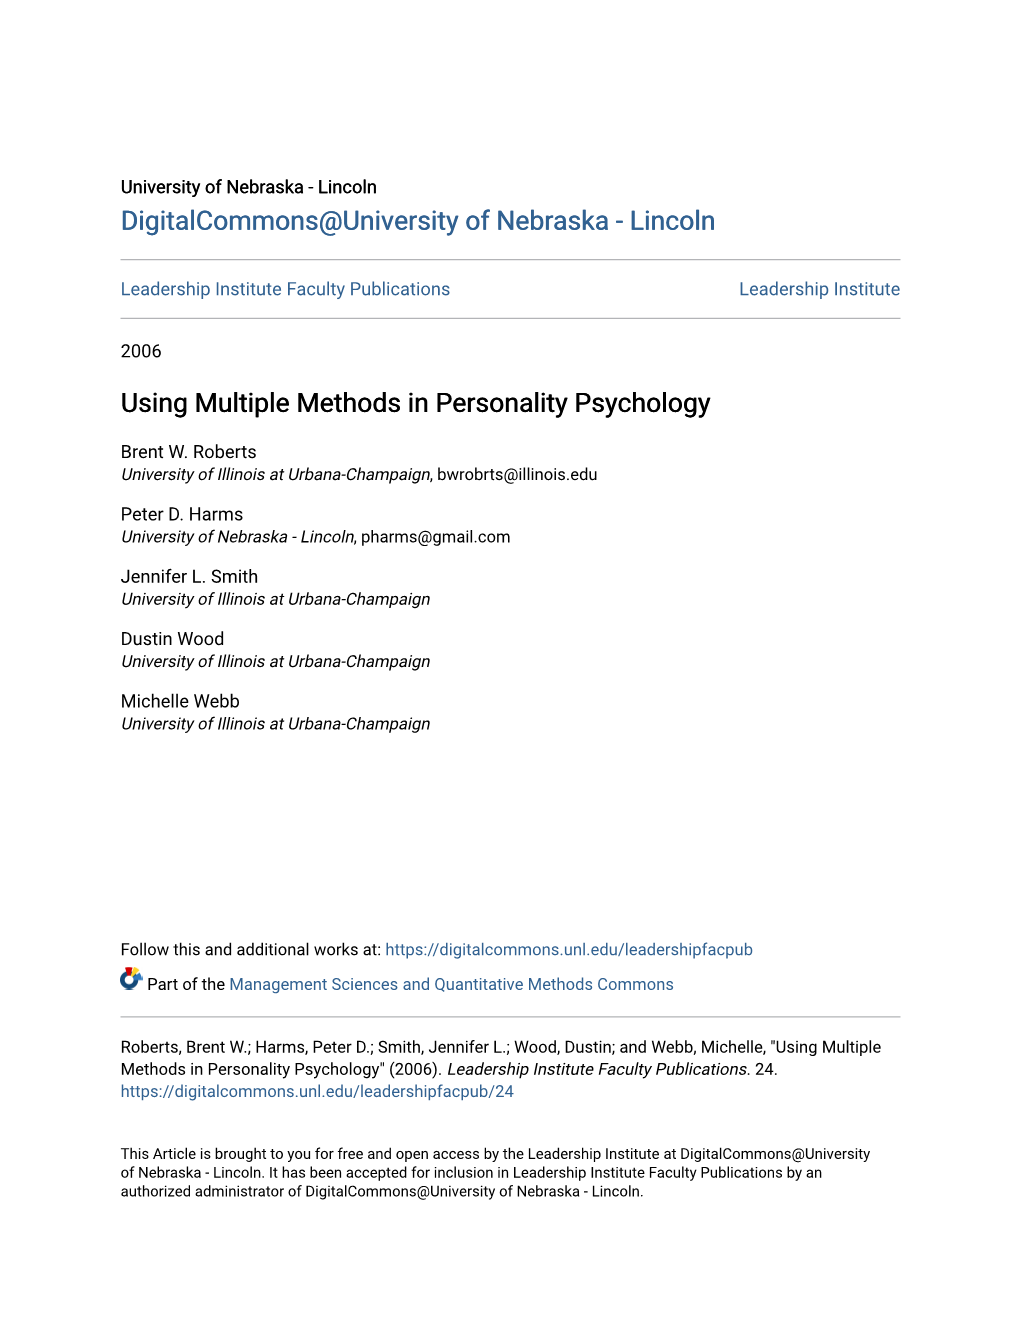 Using Multiple Methods in Personality Psychology